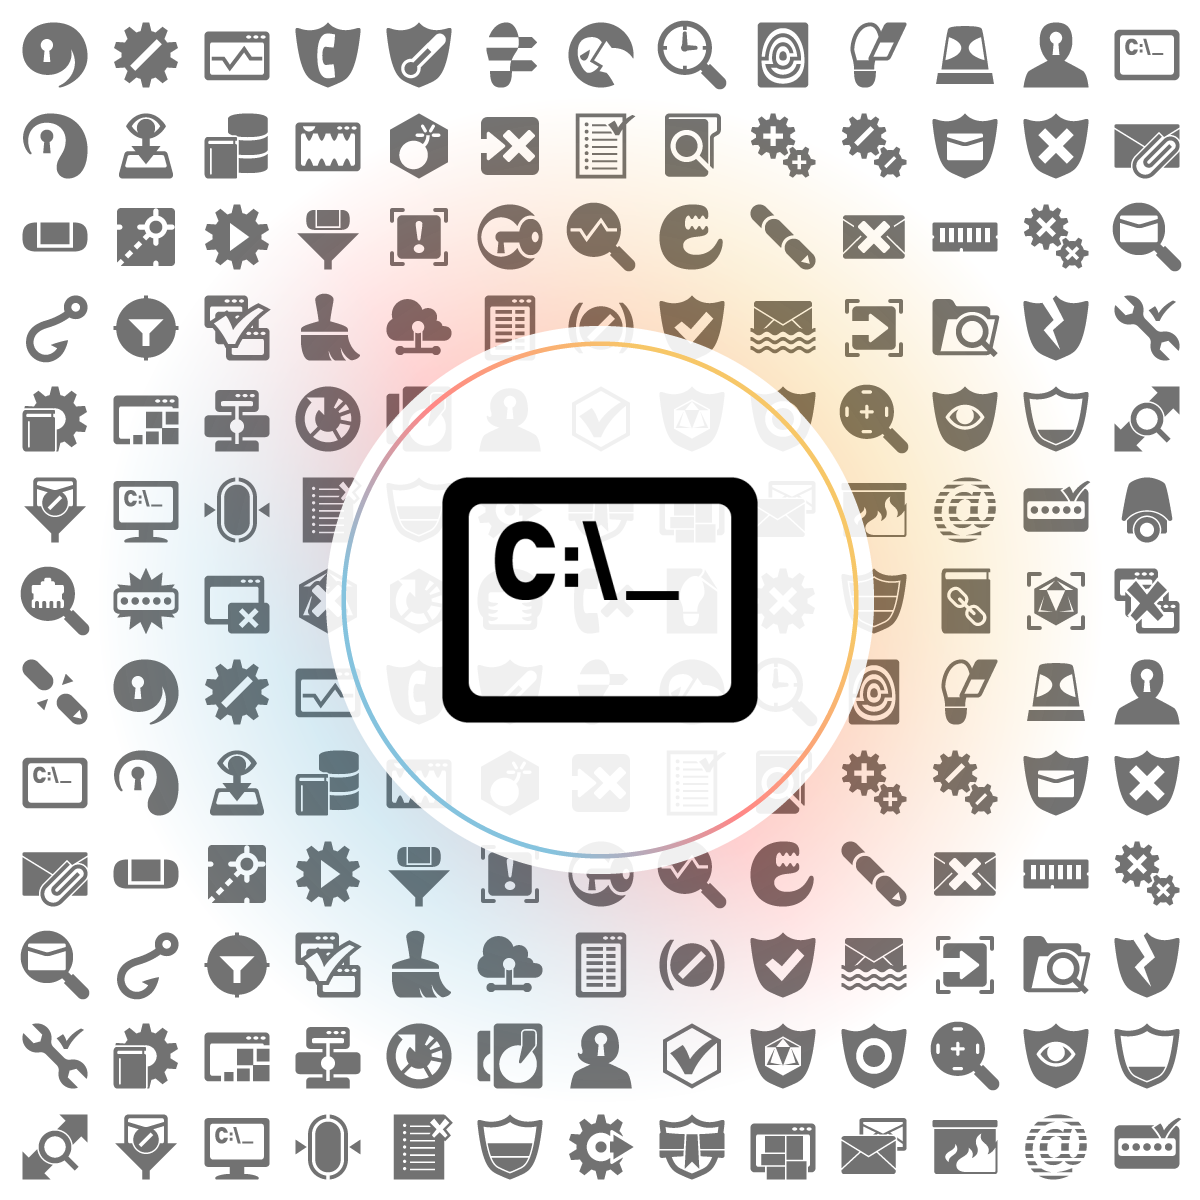 Command line interface Icon - Iconshock